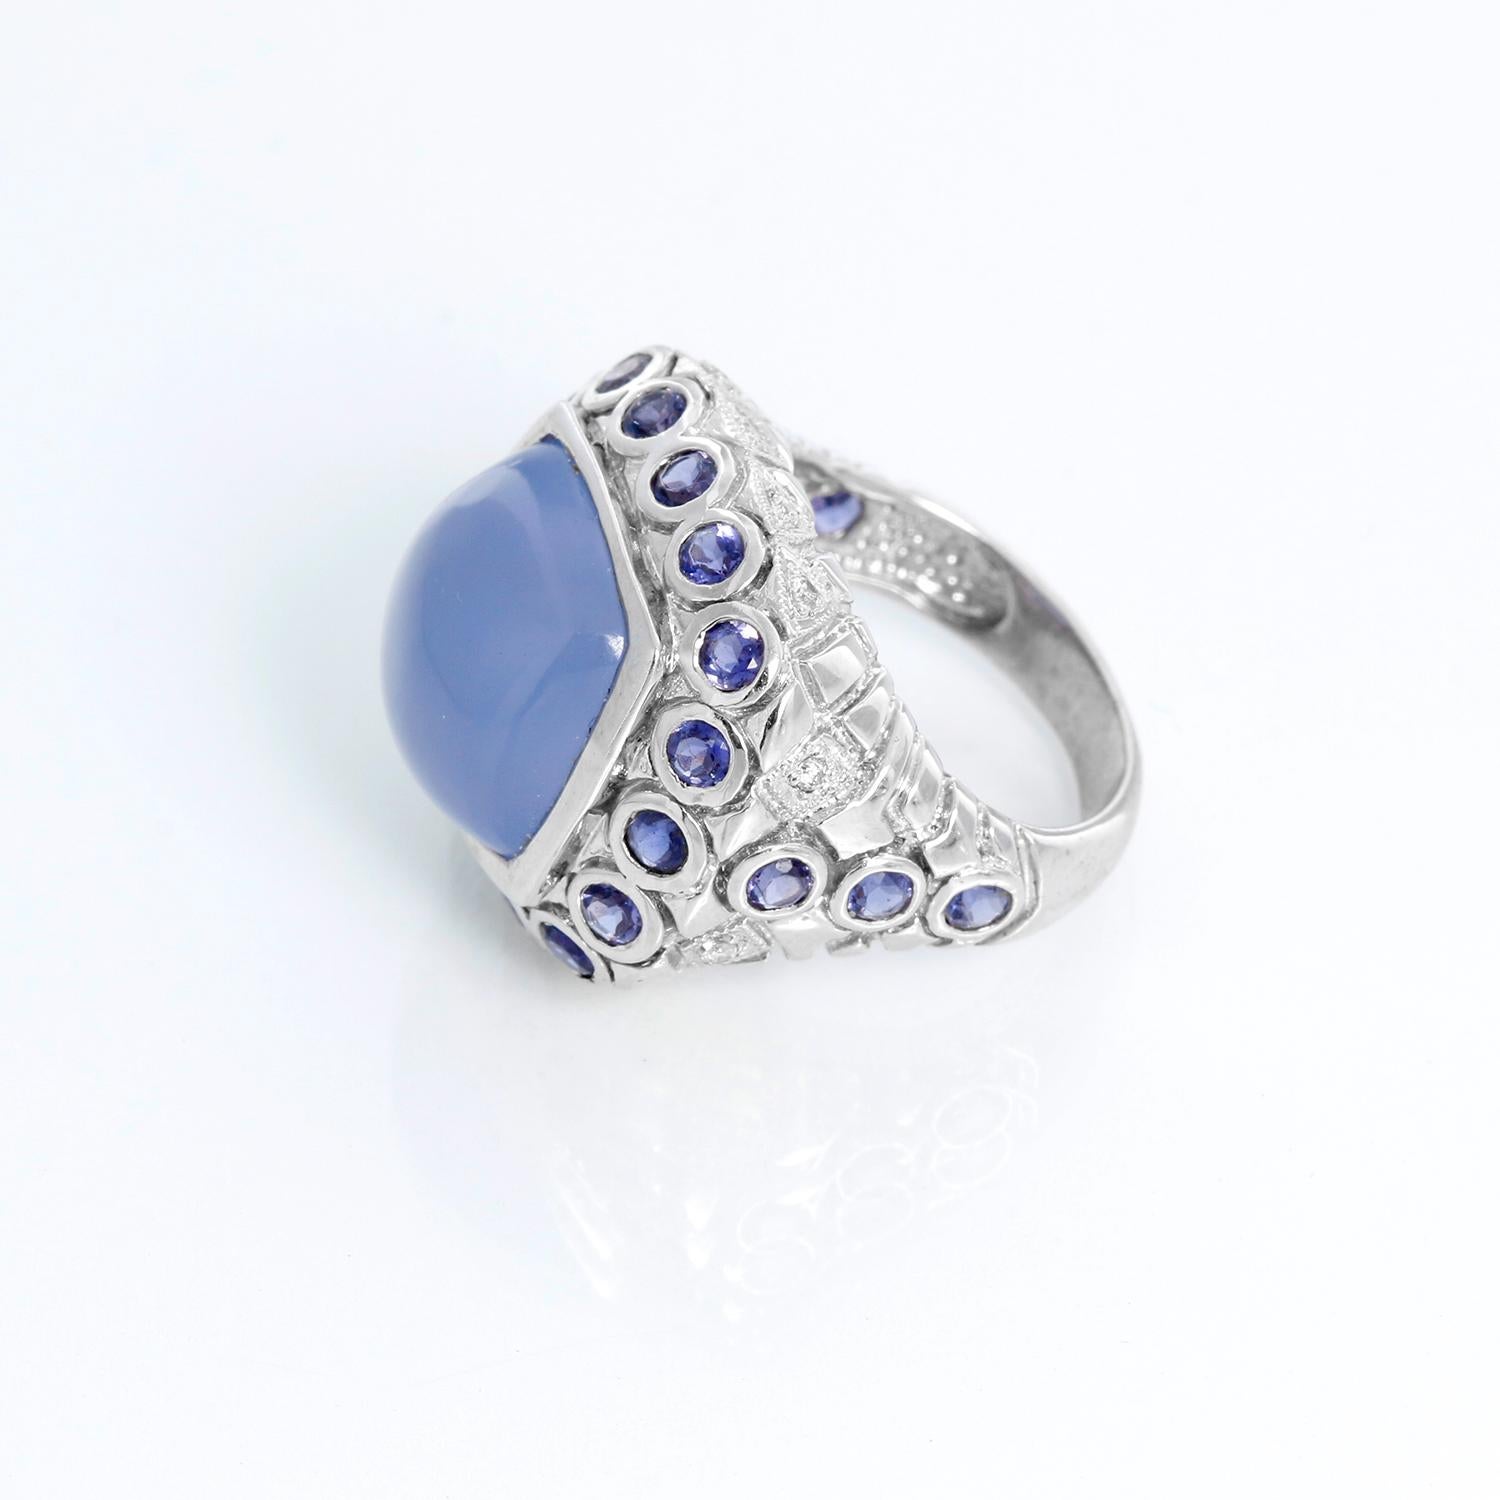 Moon Stone & Sapphire Ring Size 5 - White gold ring with a cabochon Moon stone surround by synthetic Sapphires and diamonds. Size 5. This is the perfect cocktail ring .